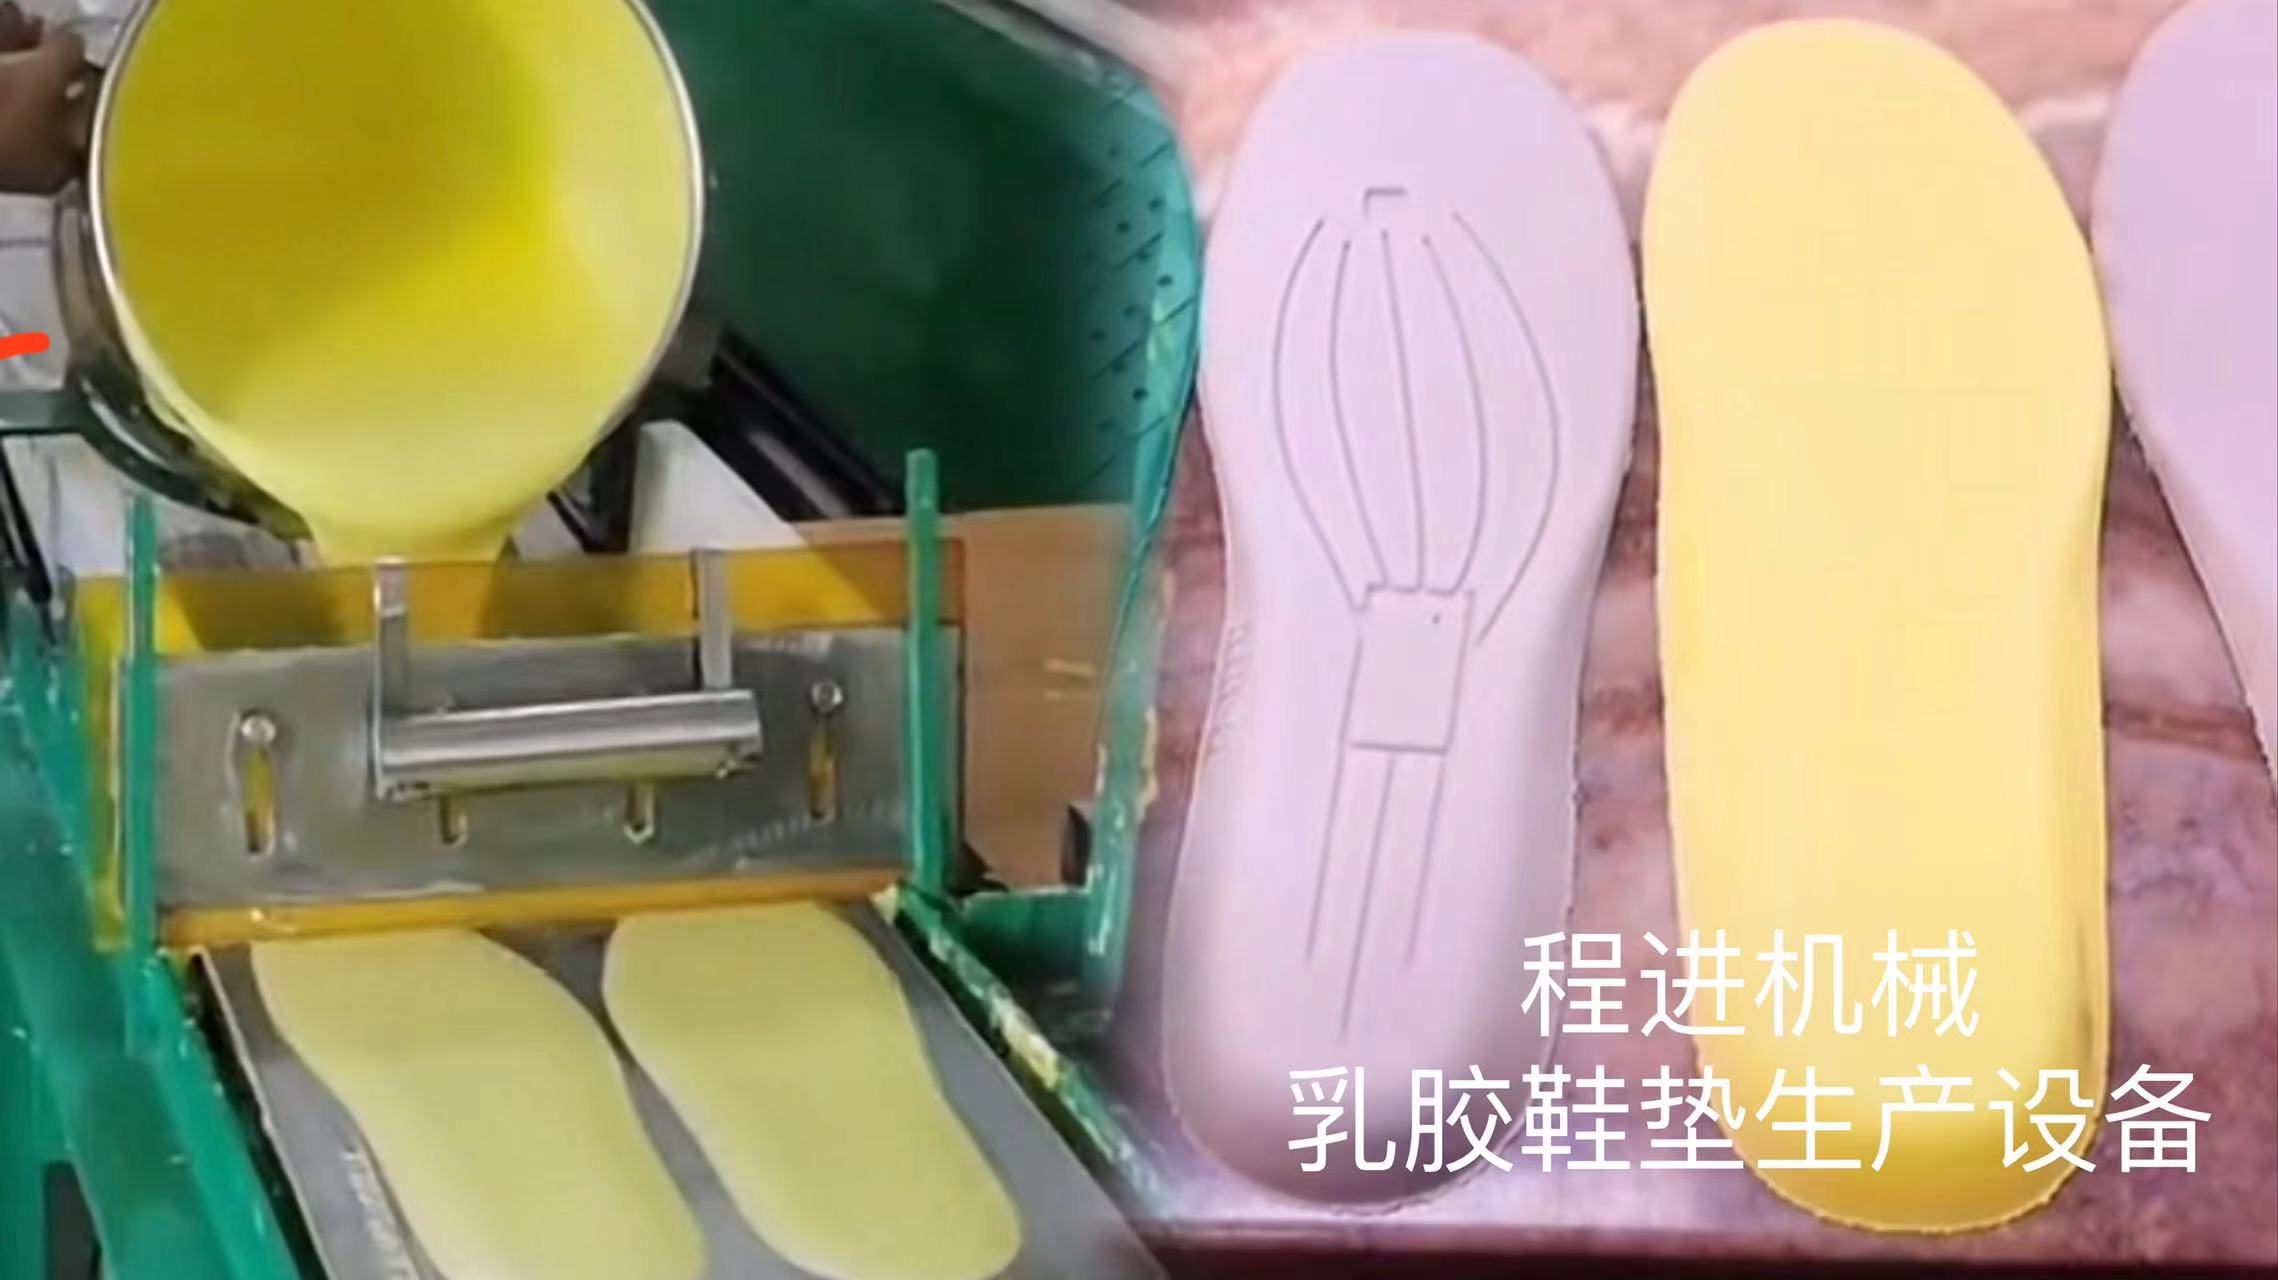 Small latex insole production equipment small insole production machinery is a mechanical equipment used to produce latex insoles.